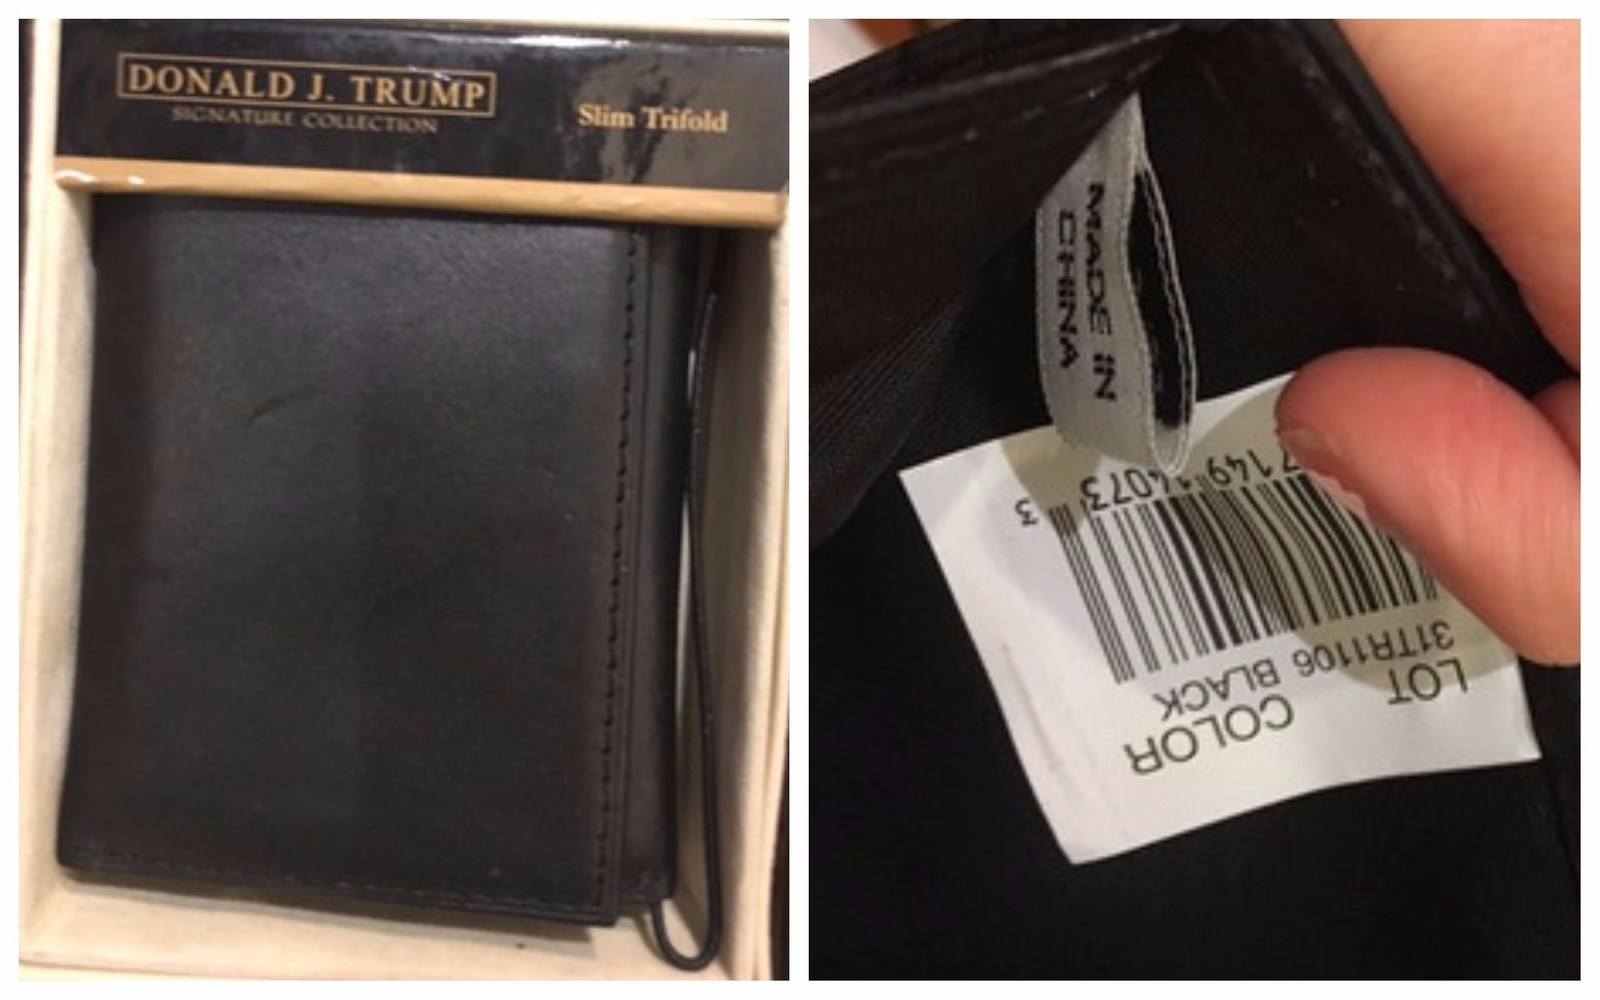 How many Donald Trump products are made in the USA